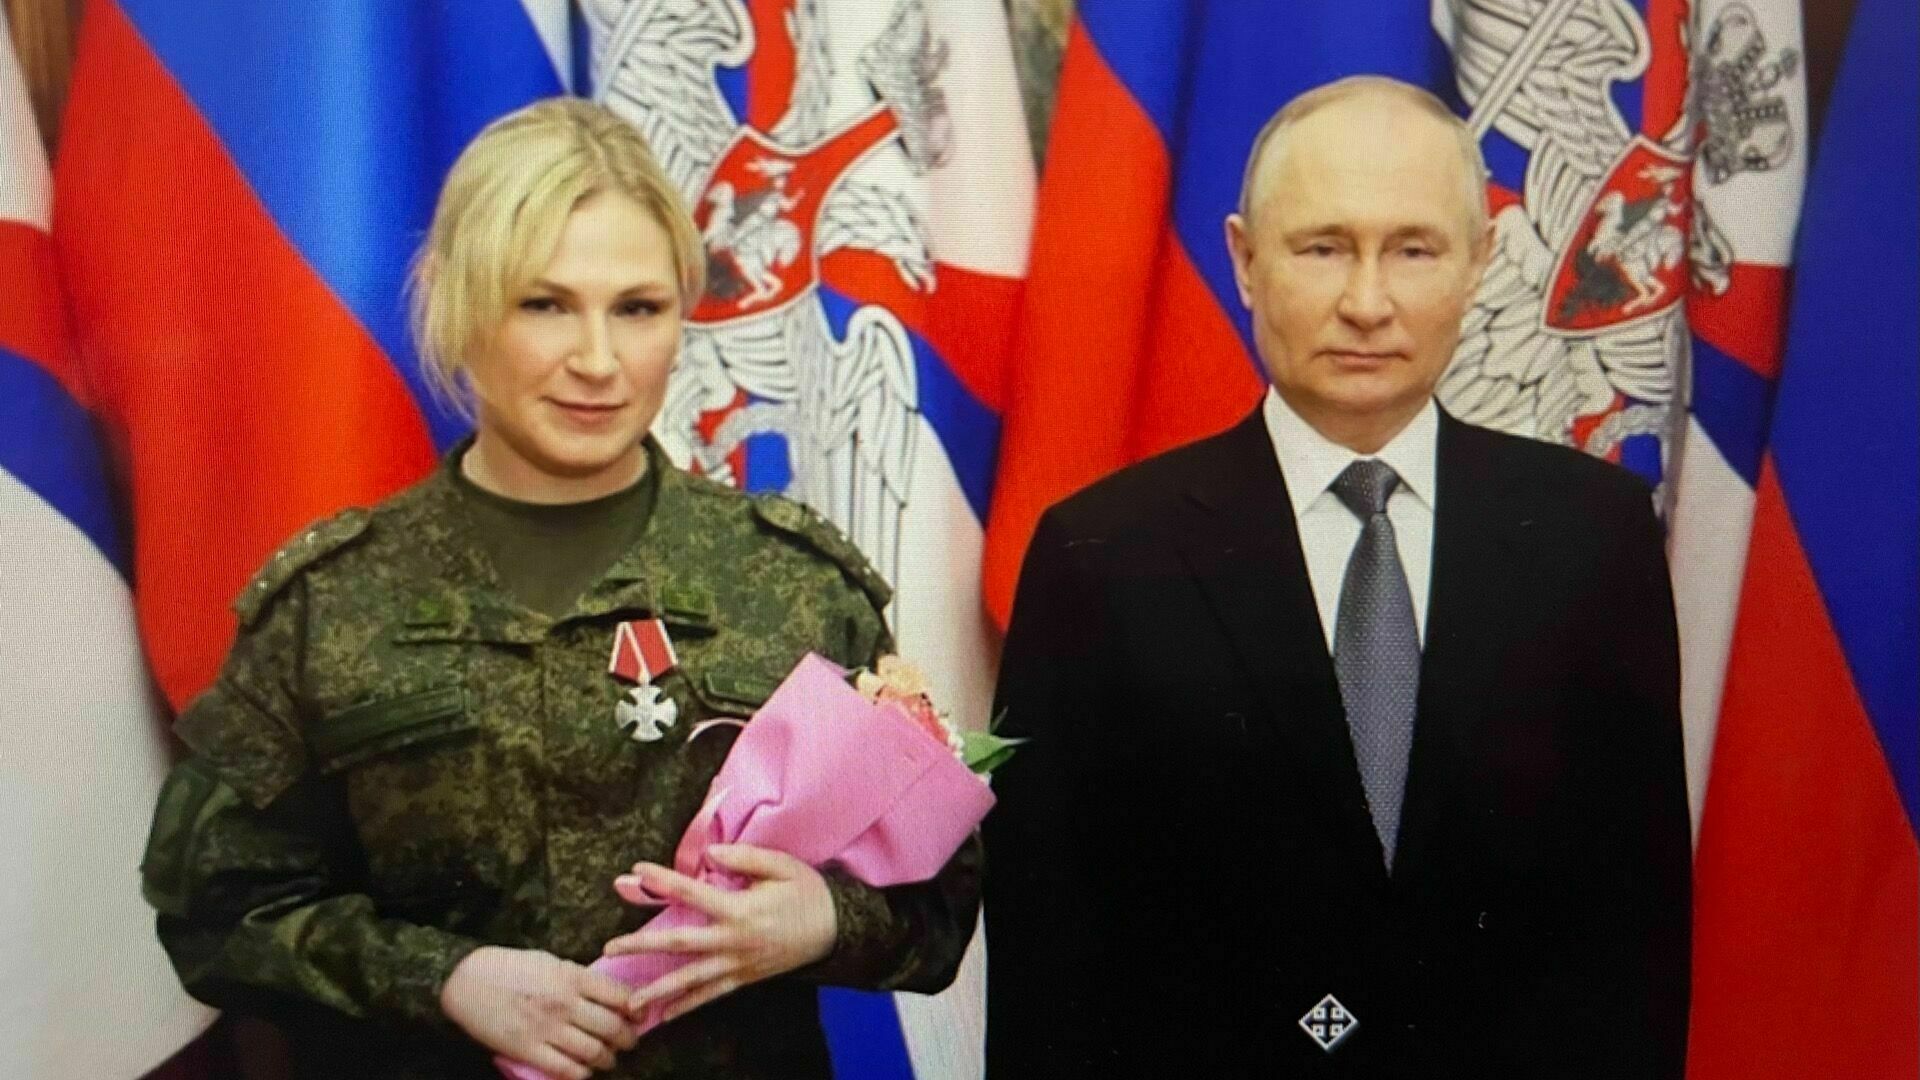 A fisherwoman, an ice cream maker, a soldier: all the blondes from the pieces with Putin are named